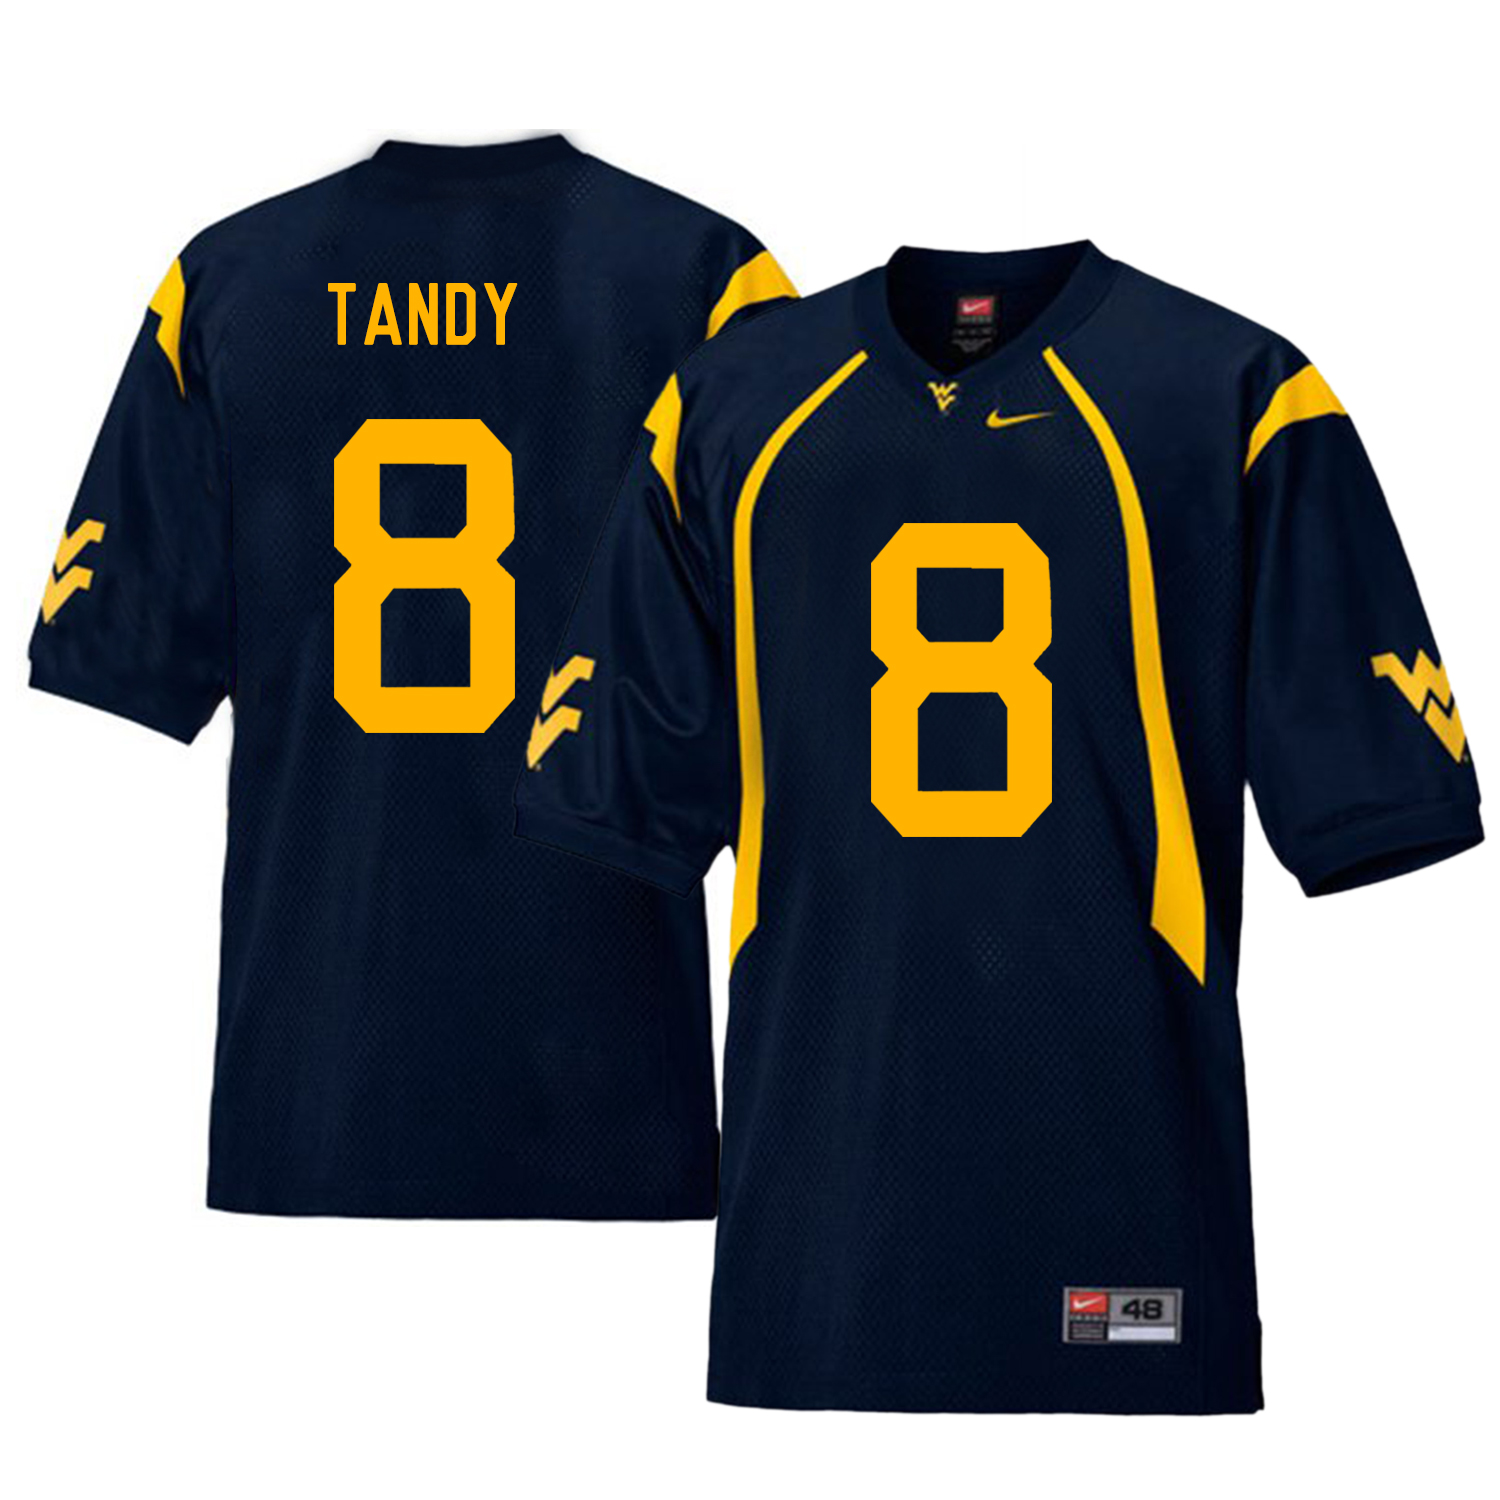 West Virginia Mountaineers 8 Keith Tandy Navy College Football Jersey